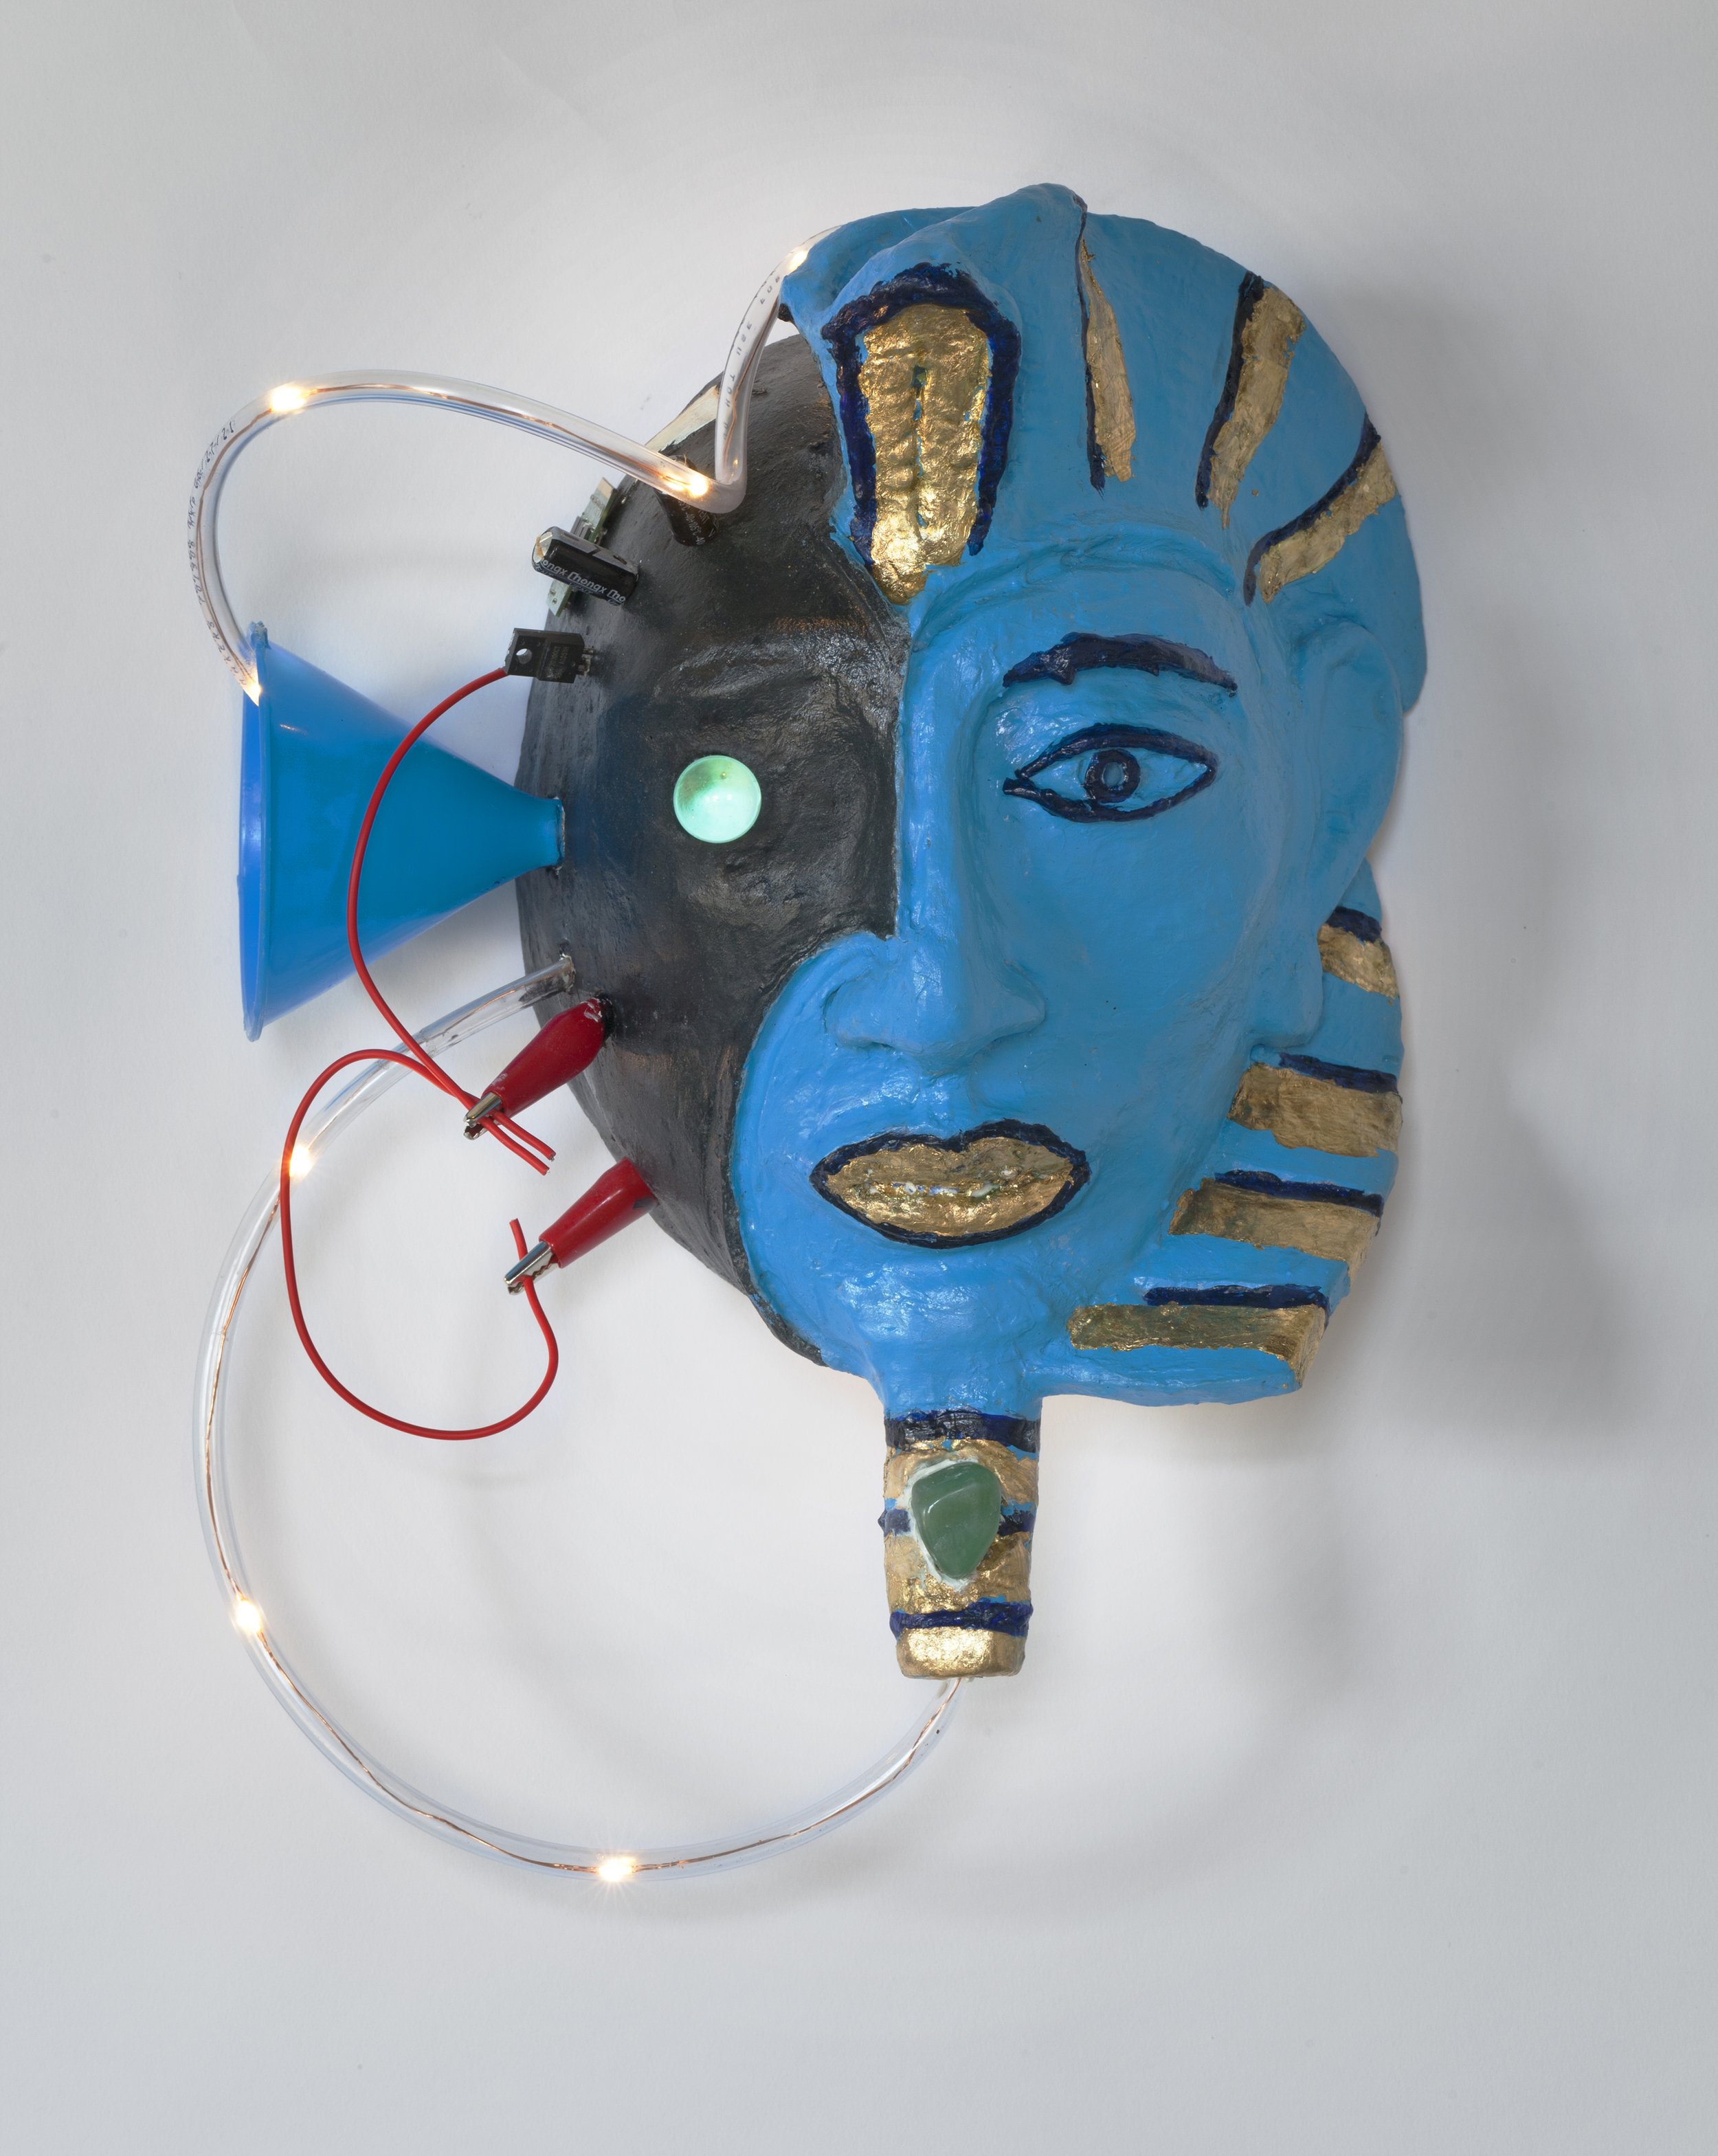   Cyborg  Clay, glaze, gold leaf, varnish, plastic tubing, marble, led lights, battery, electric clips, plastic funnel, and jade. 13 x 10.5 x 5.75 2022 